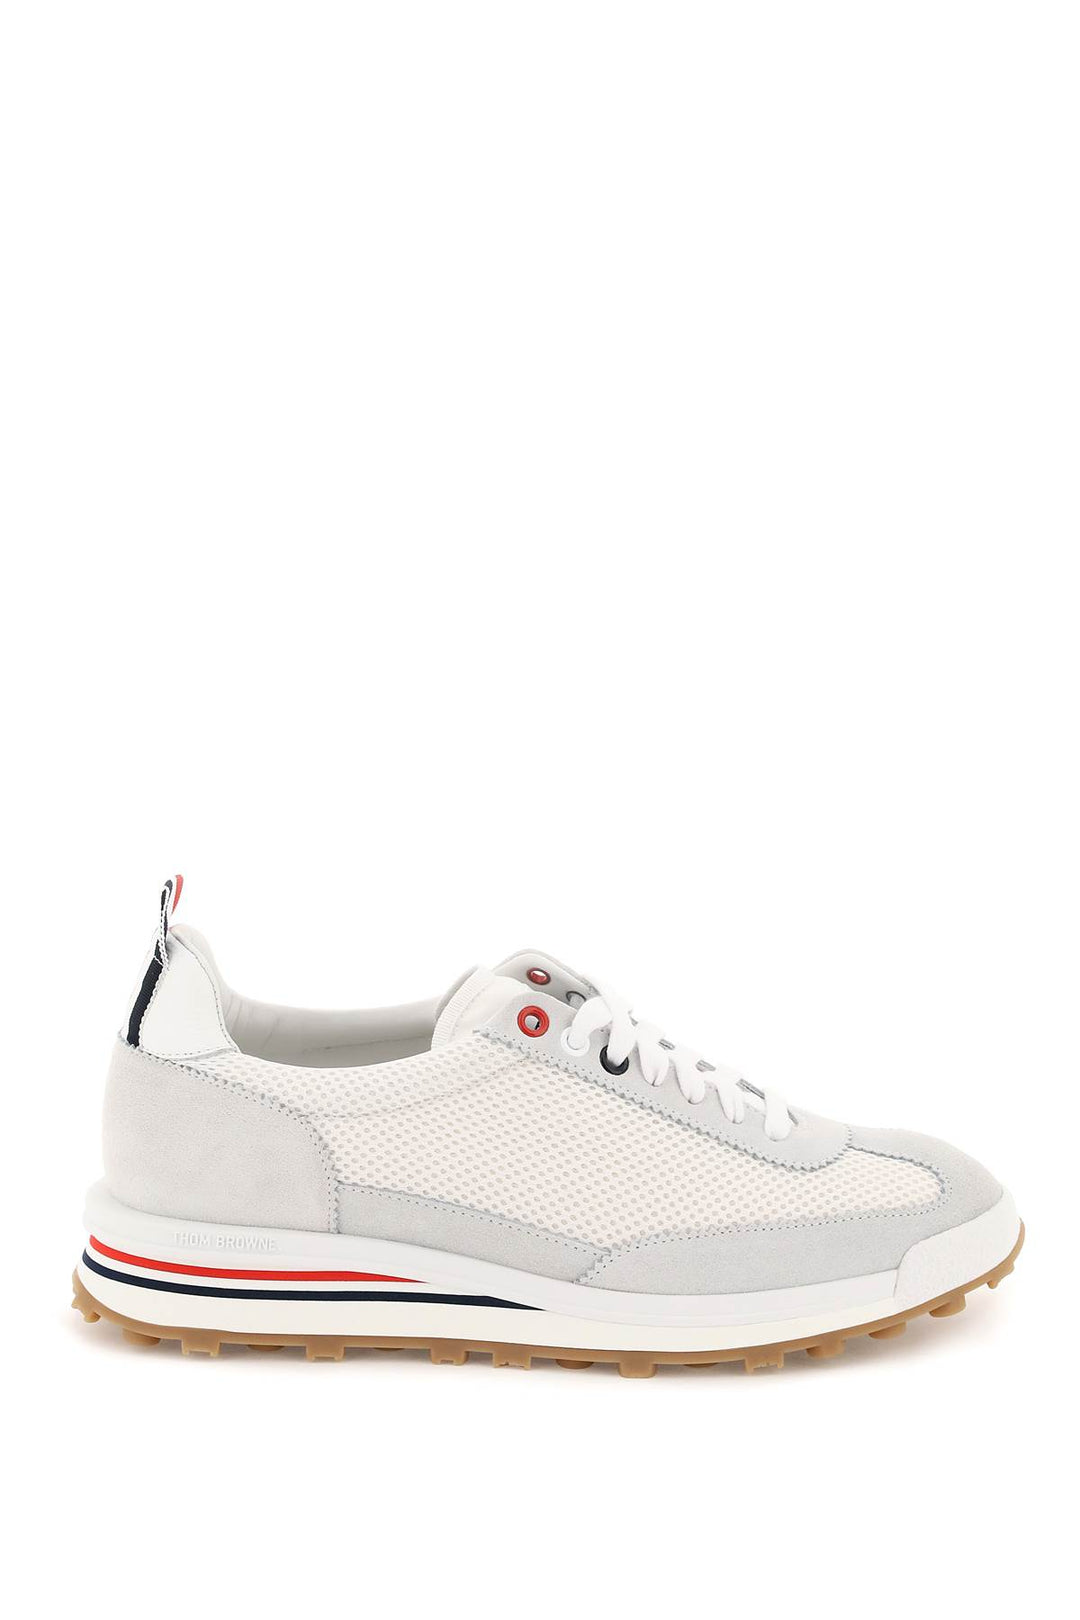 Thom Browne Tech Runner Sneakers   White